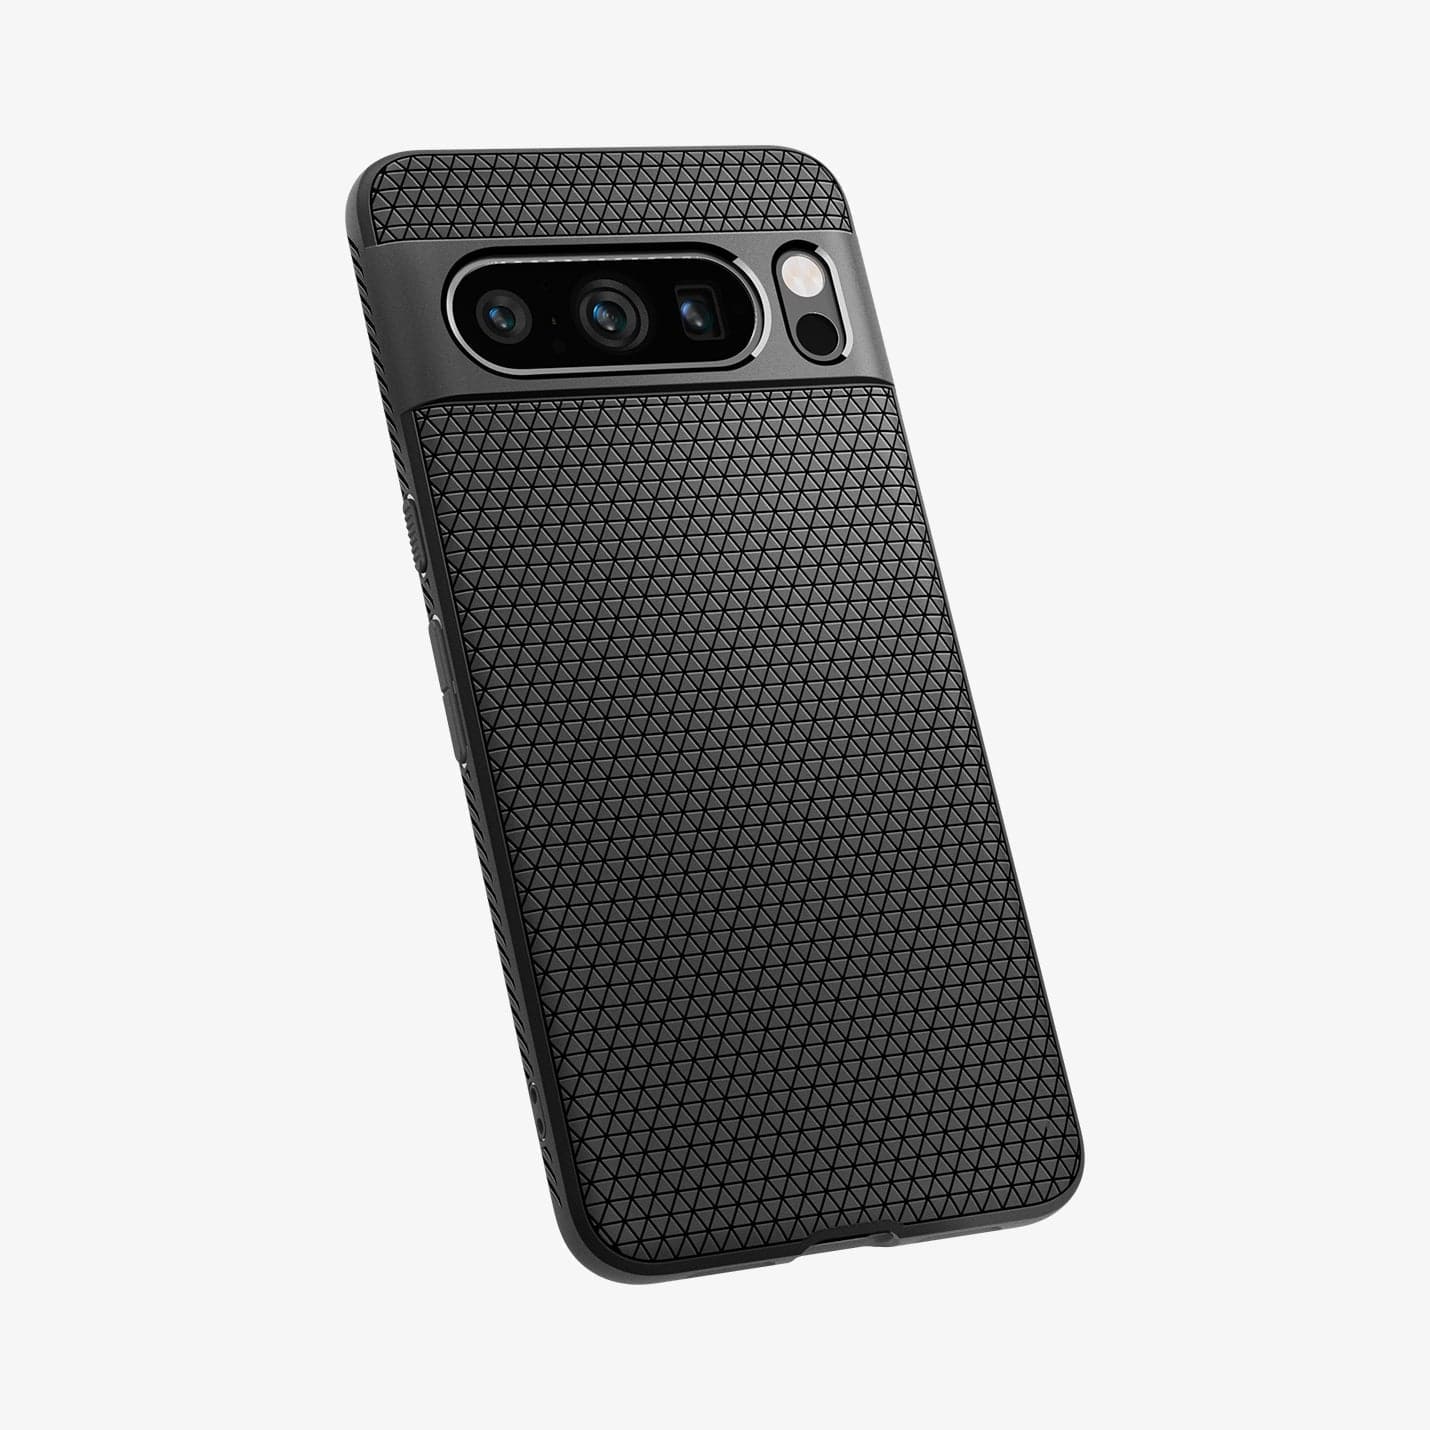 ACS06311 - Pixel 8 Pro Case Liquid Air in matte black showing the back and partial bottom